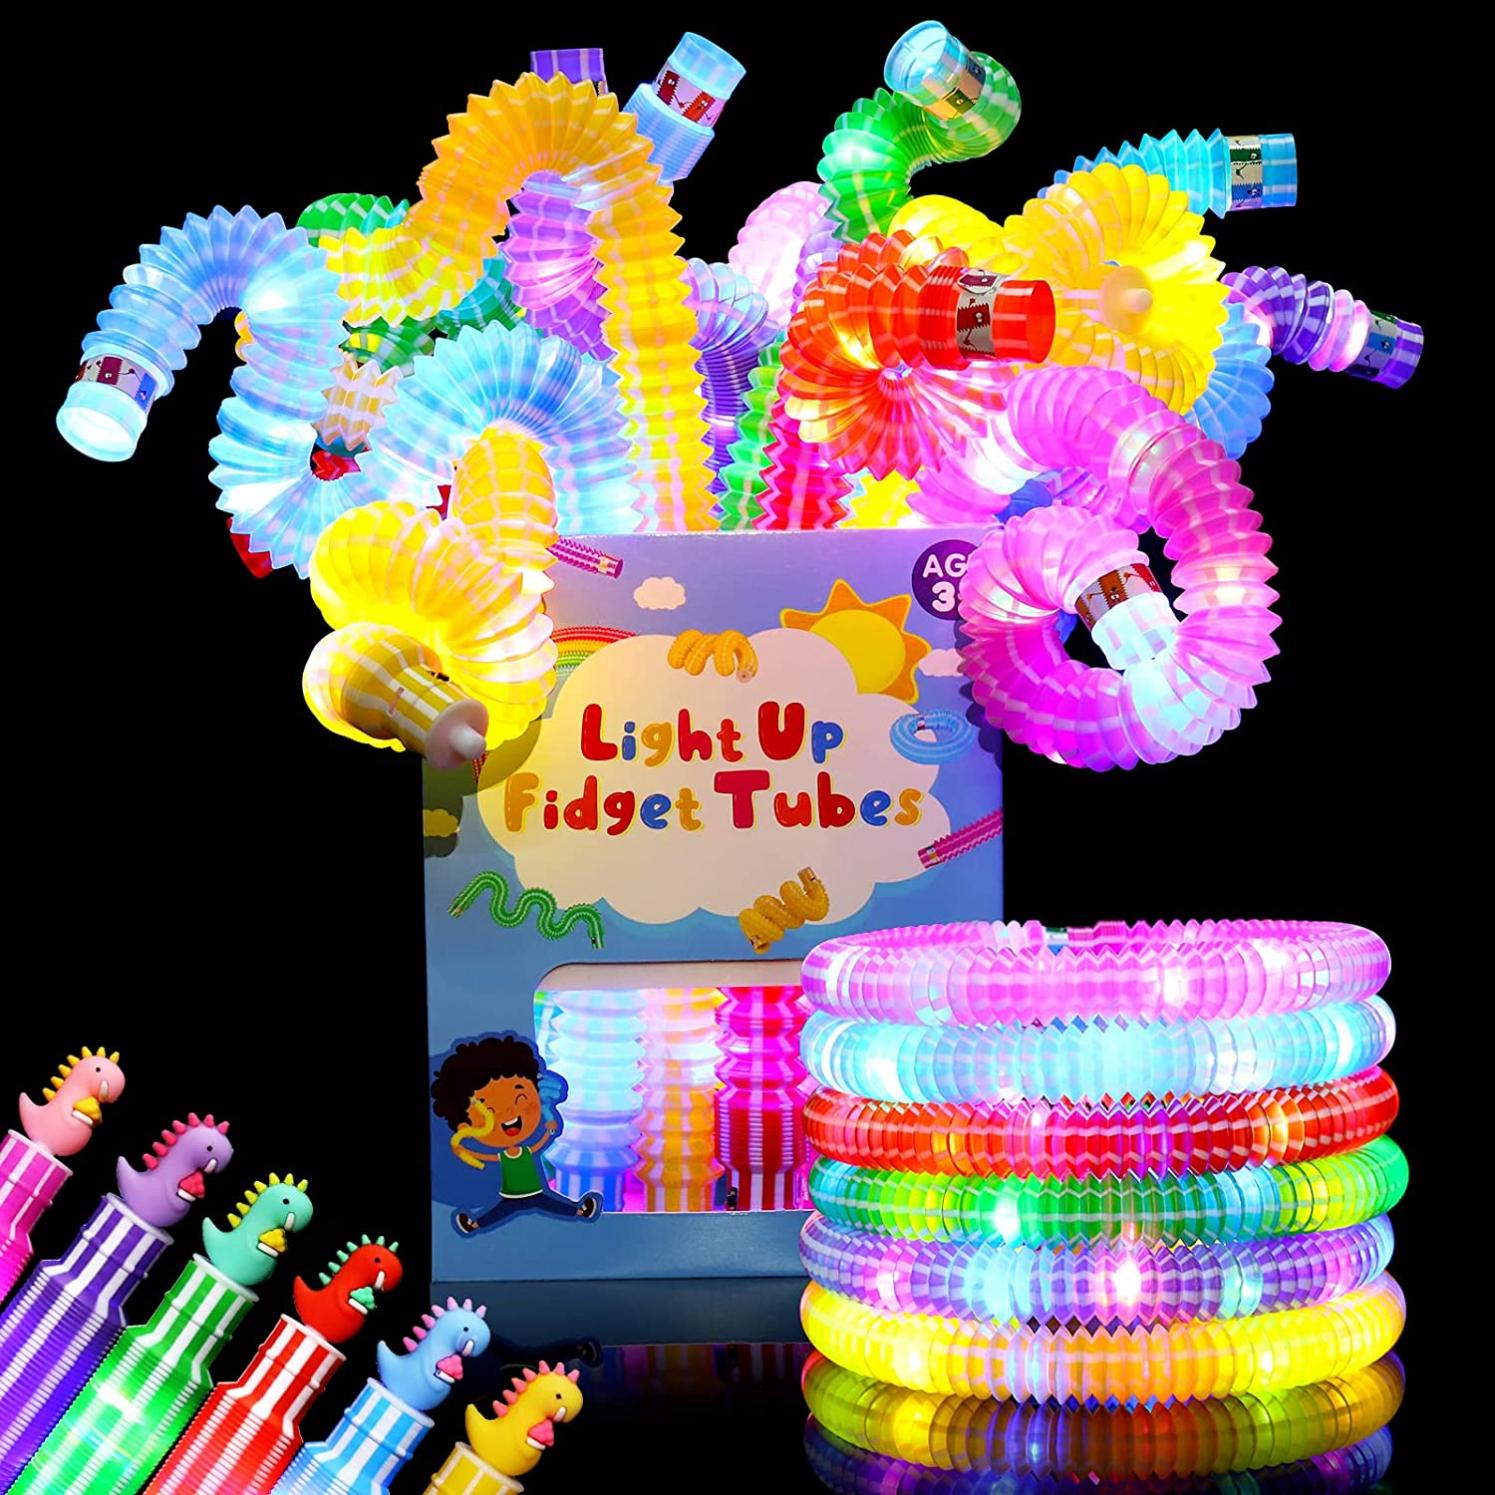 ANGGIKO Party Favors Light Up Fidget Tubes 6 Pack, Large LED Glow Sticks Bulk for Kids Toddlers Goodie Bag Stuffers, Glow in The Dark Party Supplies Christmas Stuffers Birthday Return Gifts